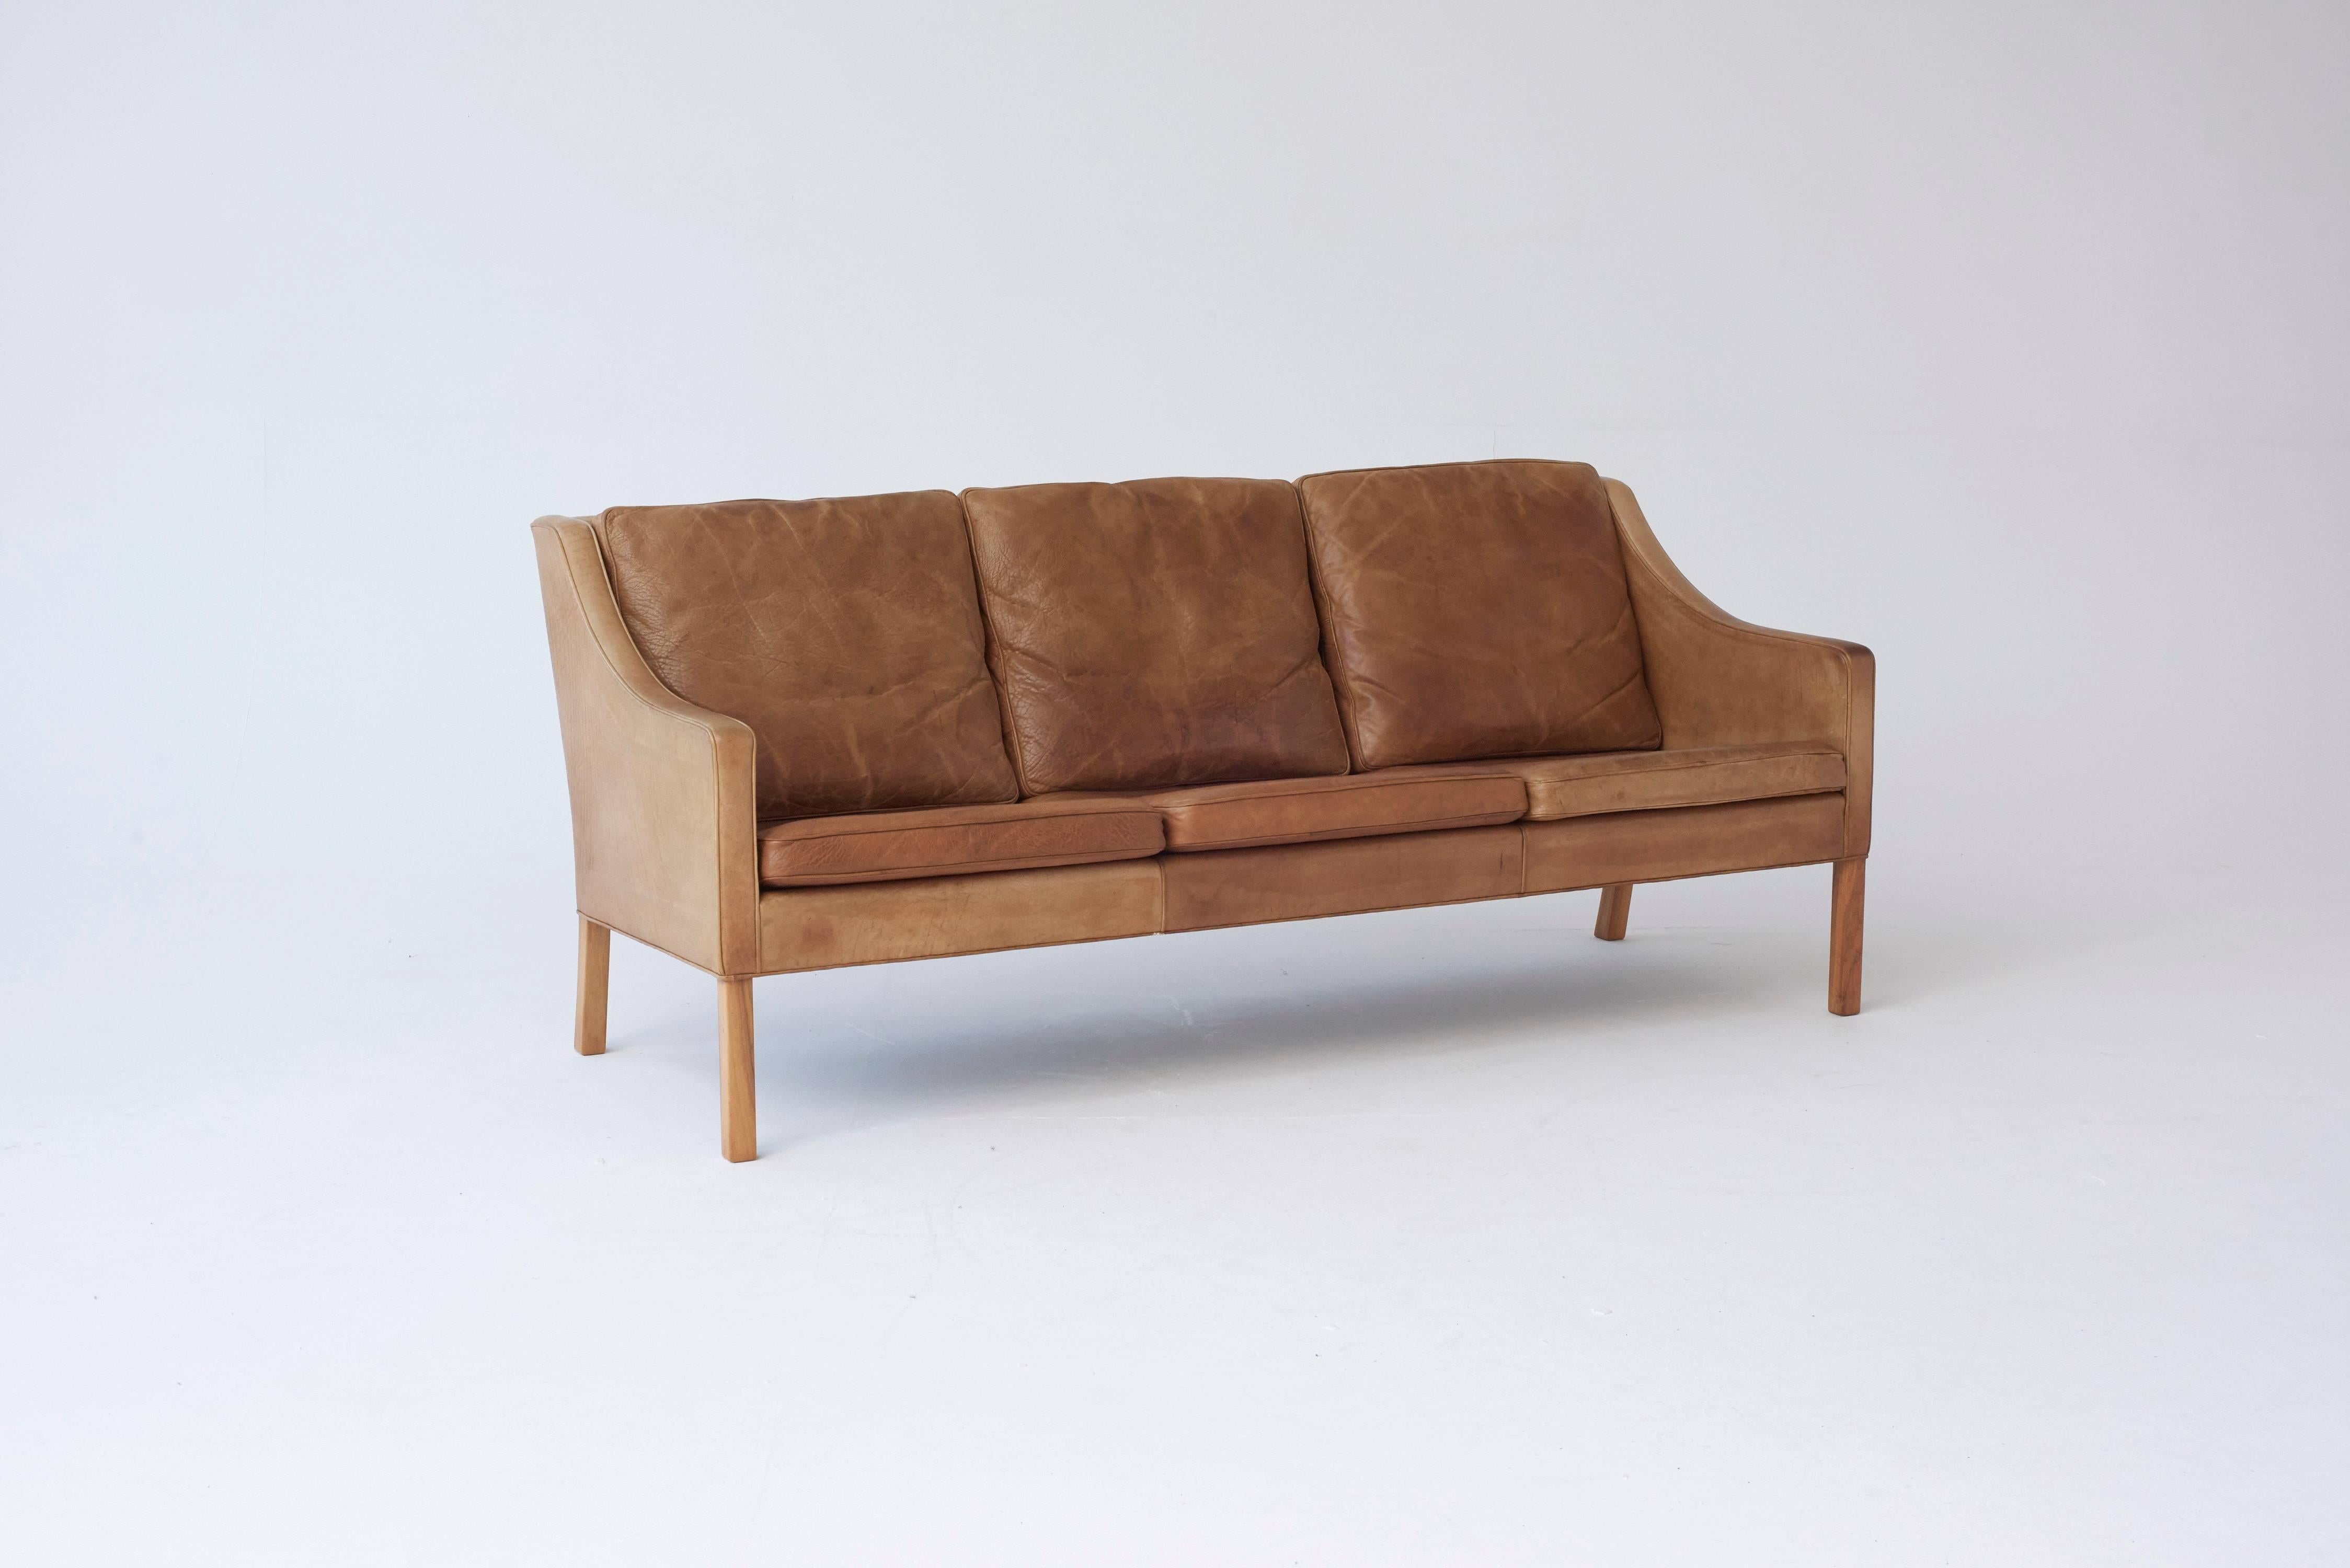 Original three seat sofa designed by Borge Mogensen for Fredericia, Denmark. Designed in 1965. In original condition with a wonderful patina. Ships worldwide - please contact us for options.